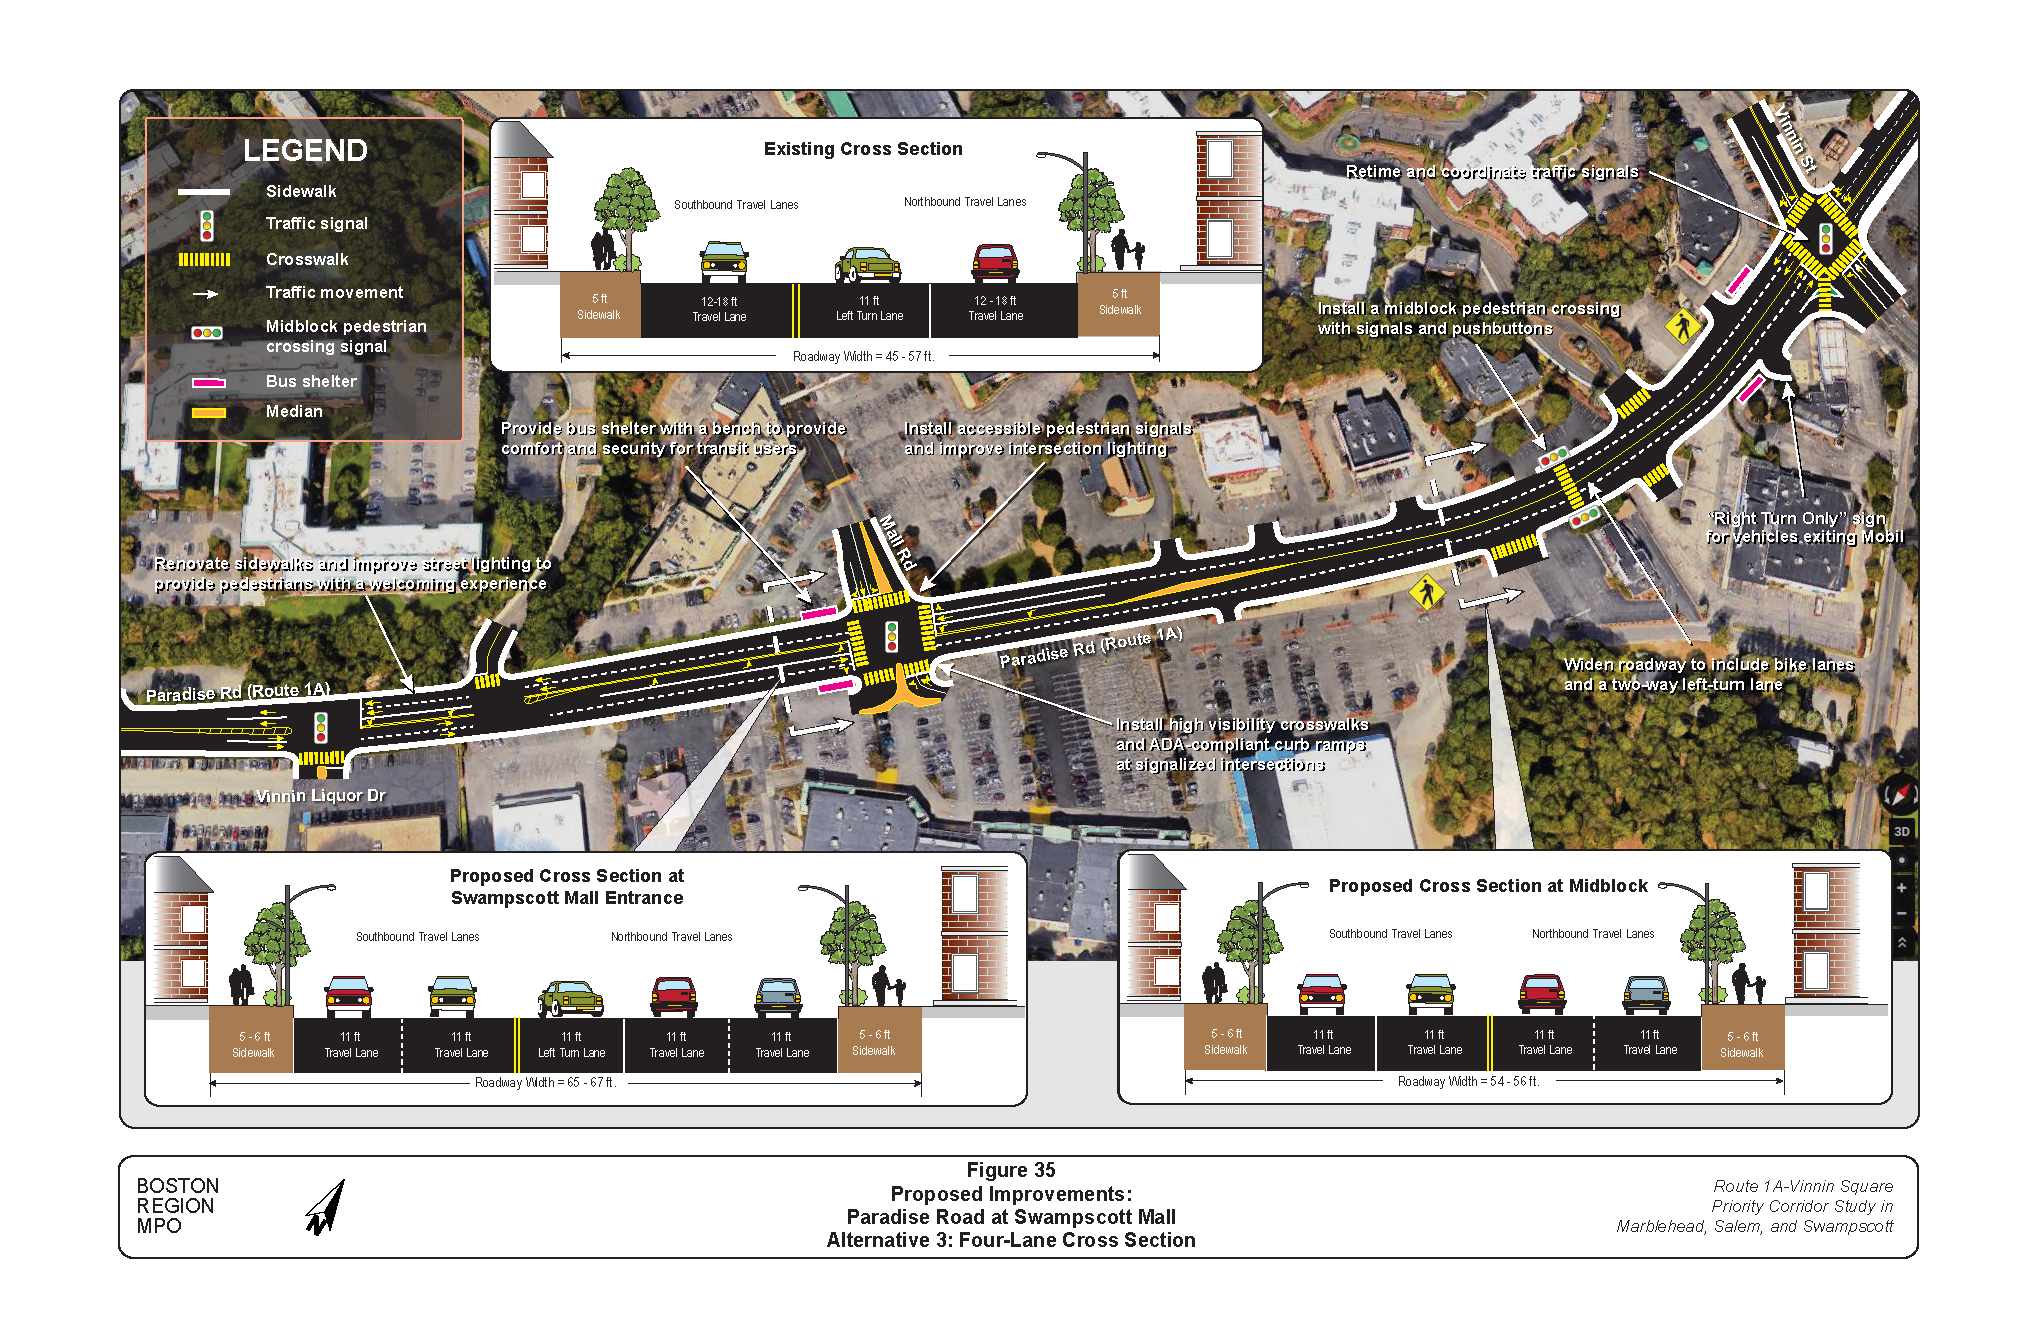 FIGURE 35. Proposed Improvements, Alternative 3: Paradise Road at Swampscott Mall.Figure 35 is a map of Paradise Road at Swampscott Mall showing the location of proposed improvements in Alternative 3. The proposed improvements are described in text boxes. Graphics embedded show proposed roadway cross sections with lane widths.